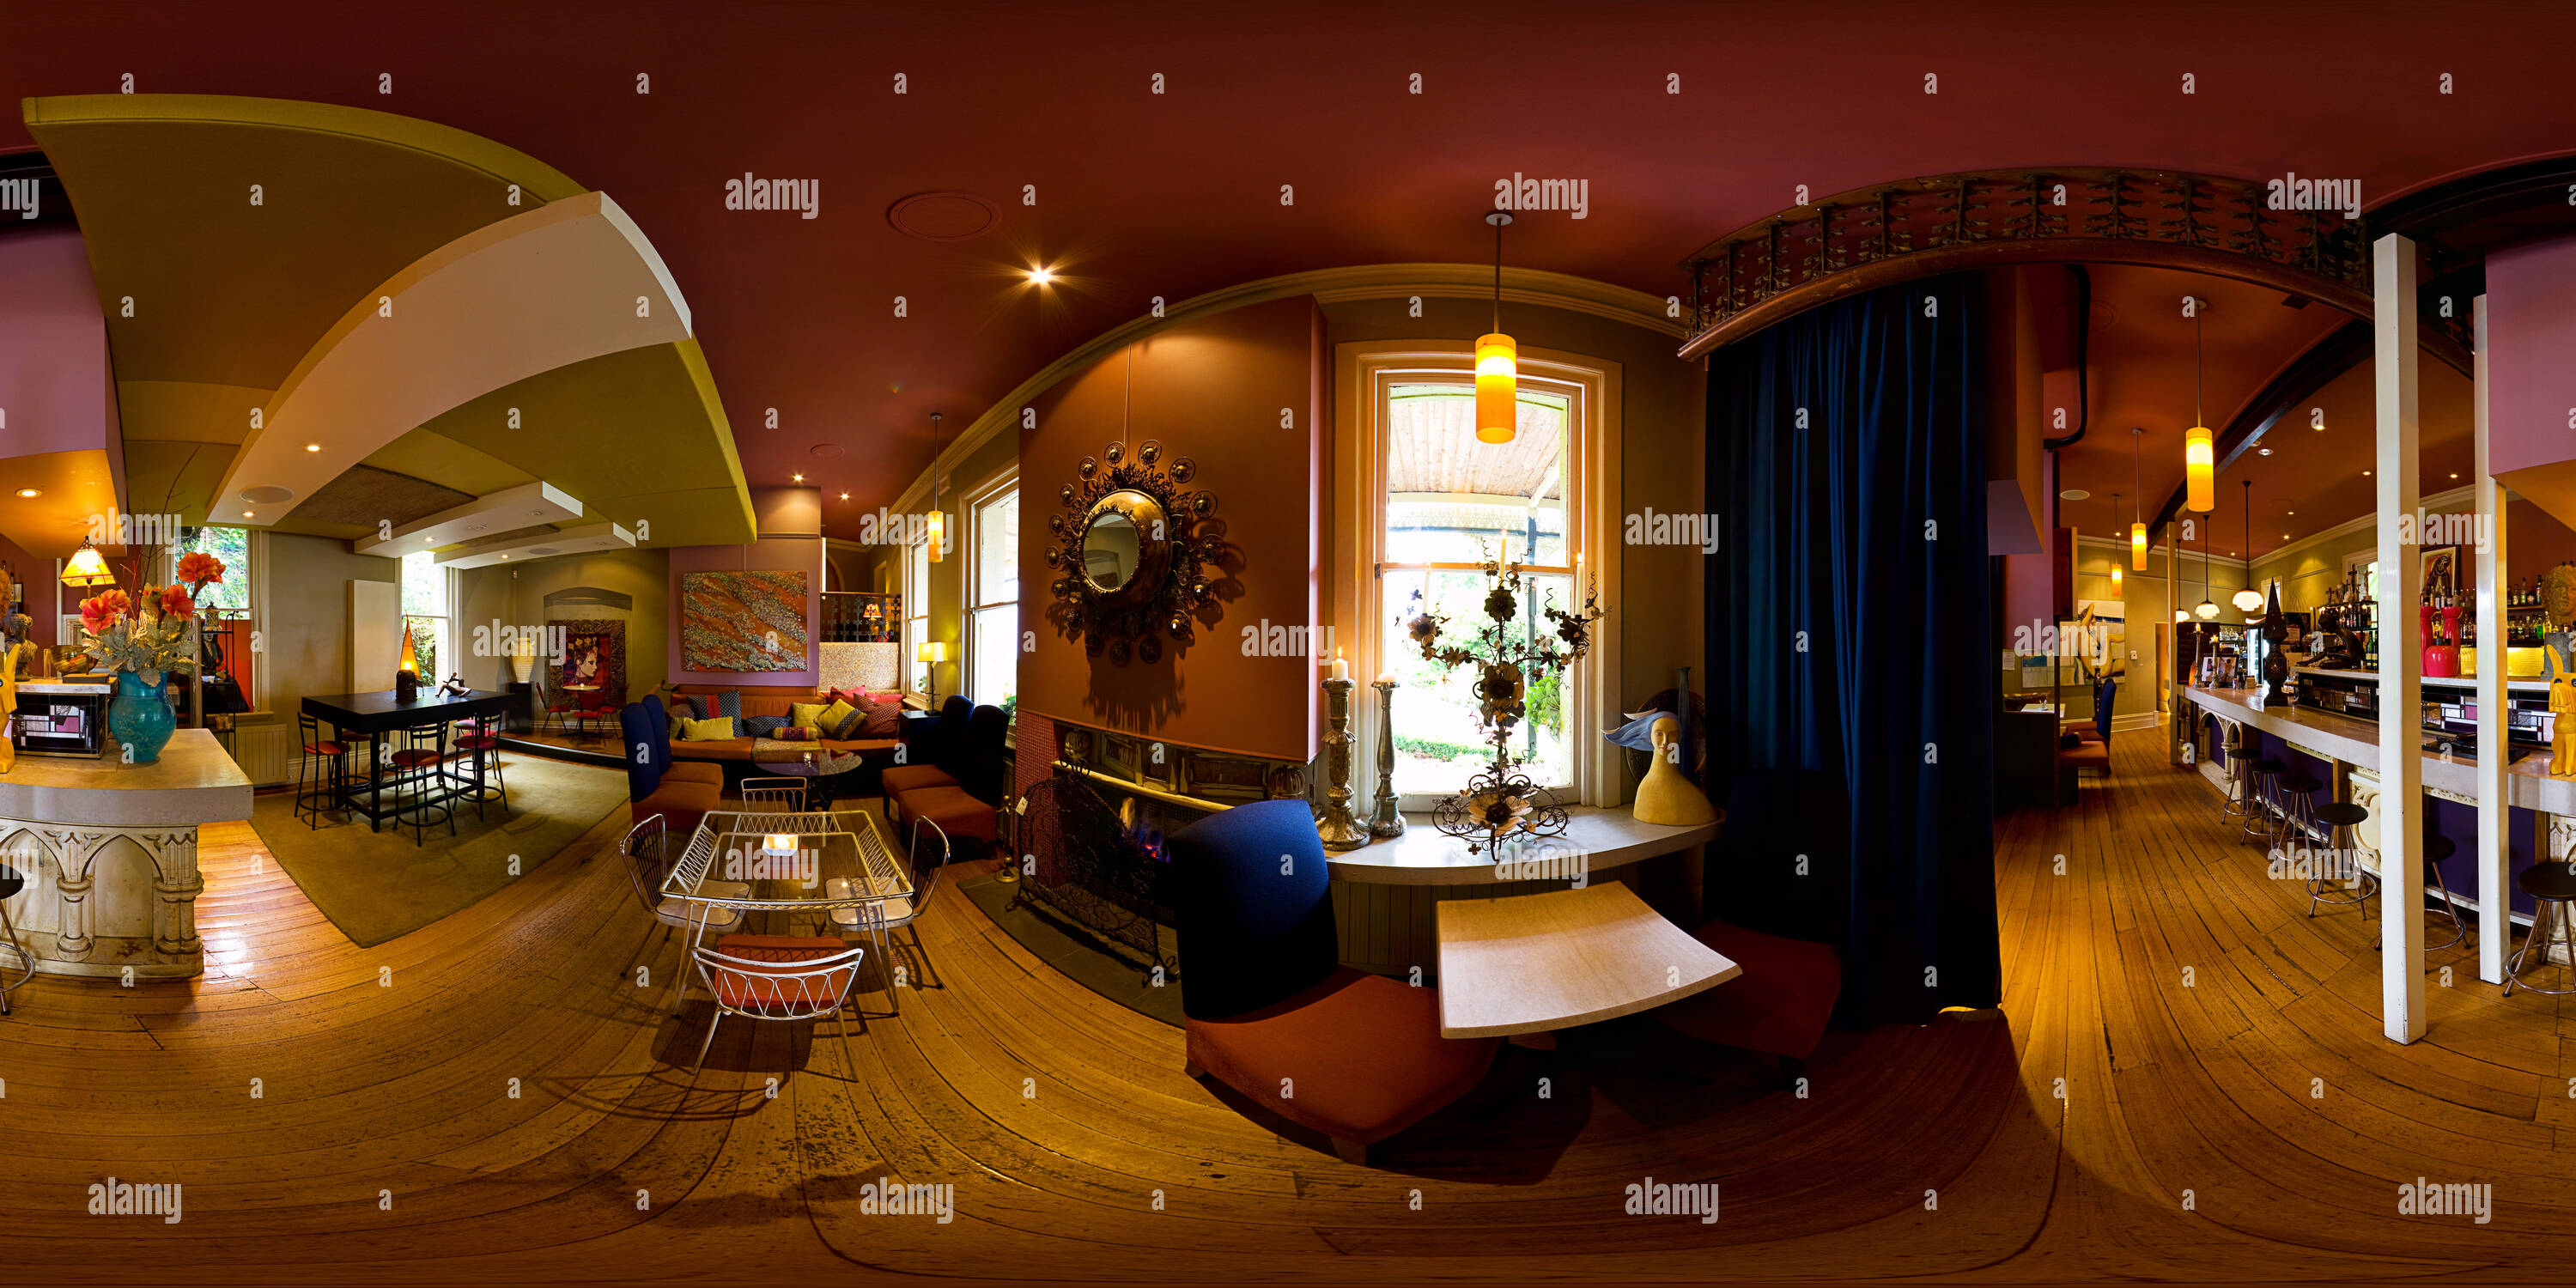 360 degree panoramic view of The Convent Gallery - The Altar Bar & Lounge - Daylesford, Victoria